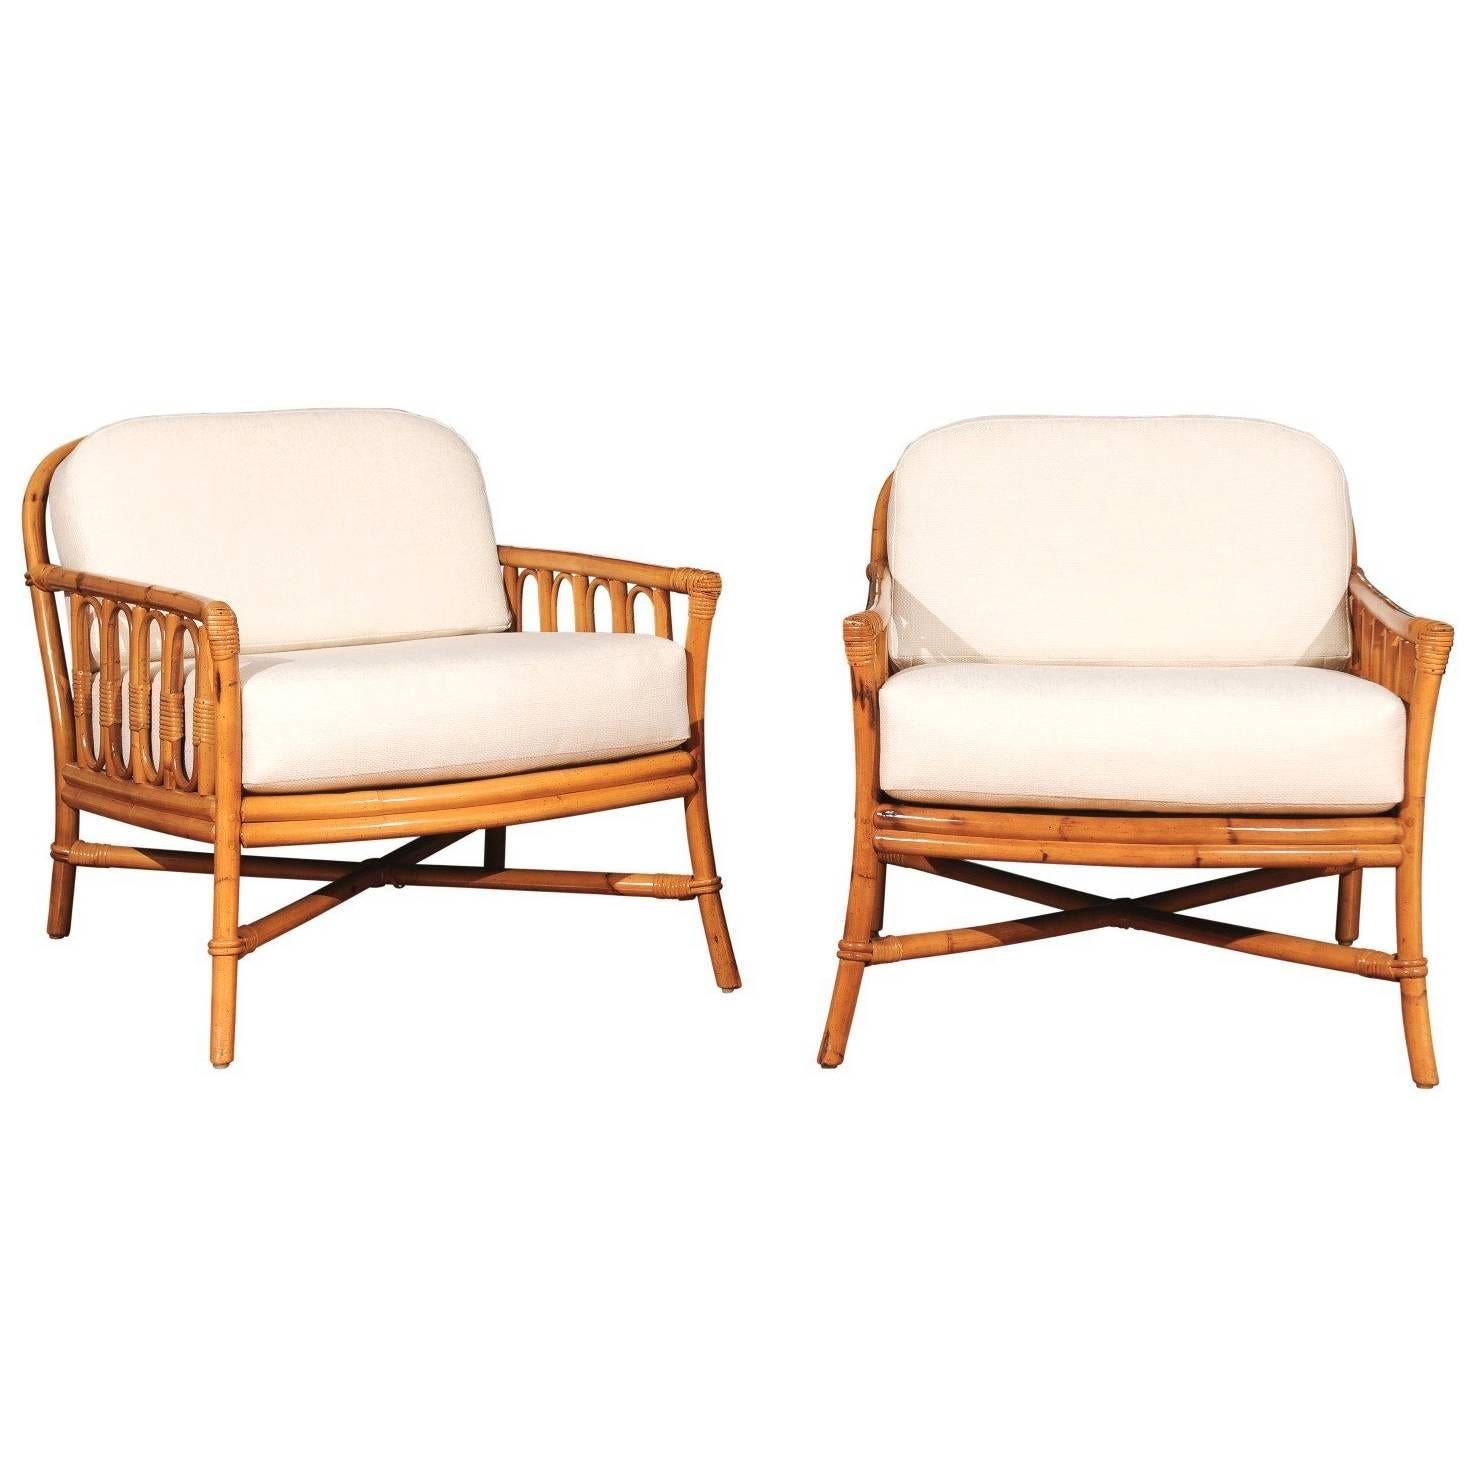 Decorative Pair of Restored Vintage Ficks Reed Loungers